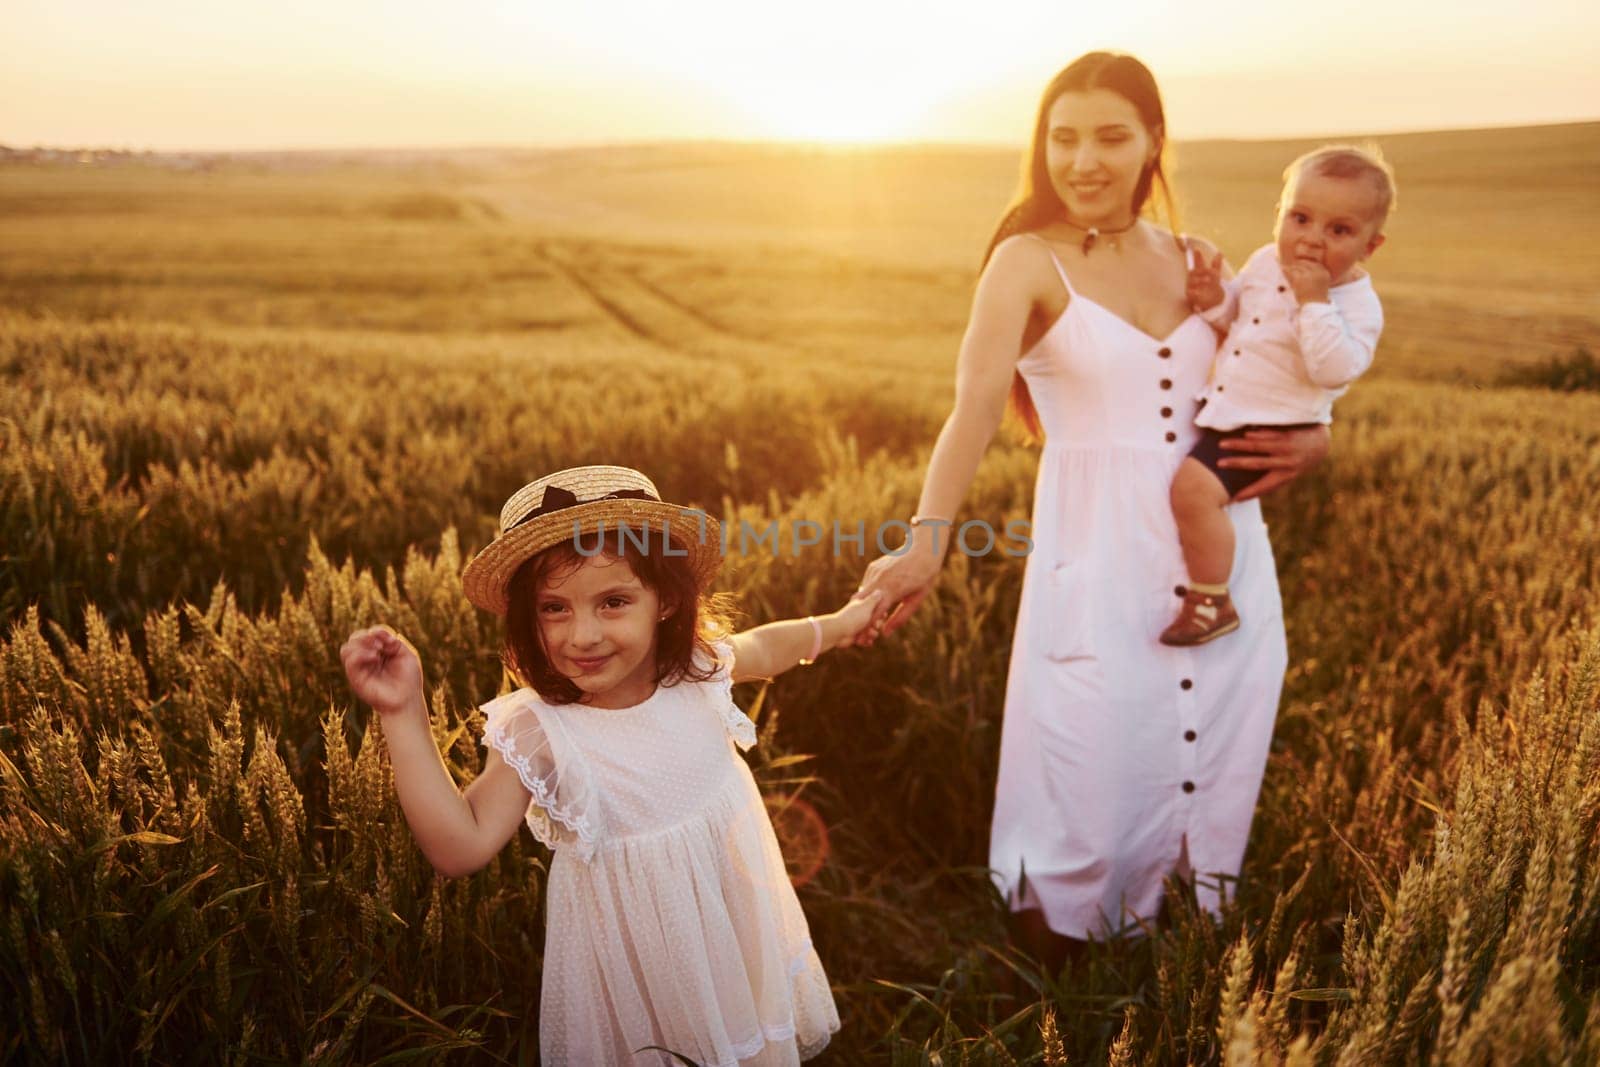 Cheerful family of mother, little son and daughter spending free time on the field at sunny day time of summer.